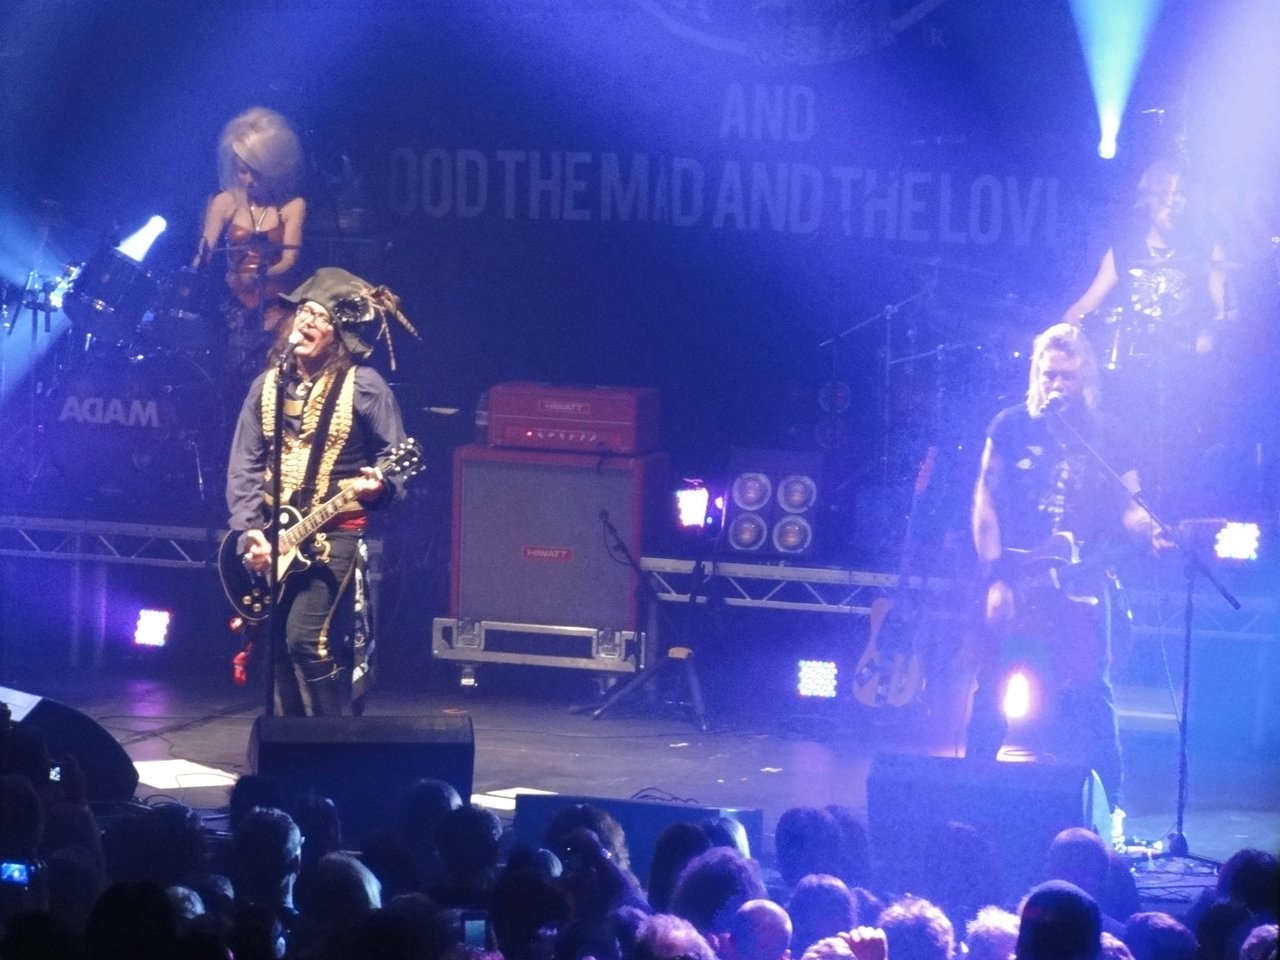 10 Adam Ant at the Roundhouse.jpg